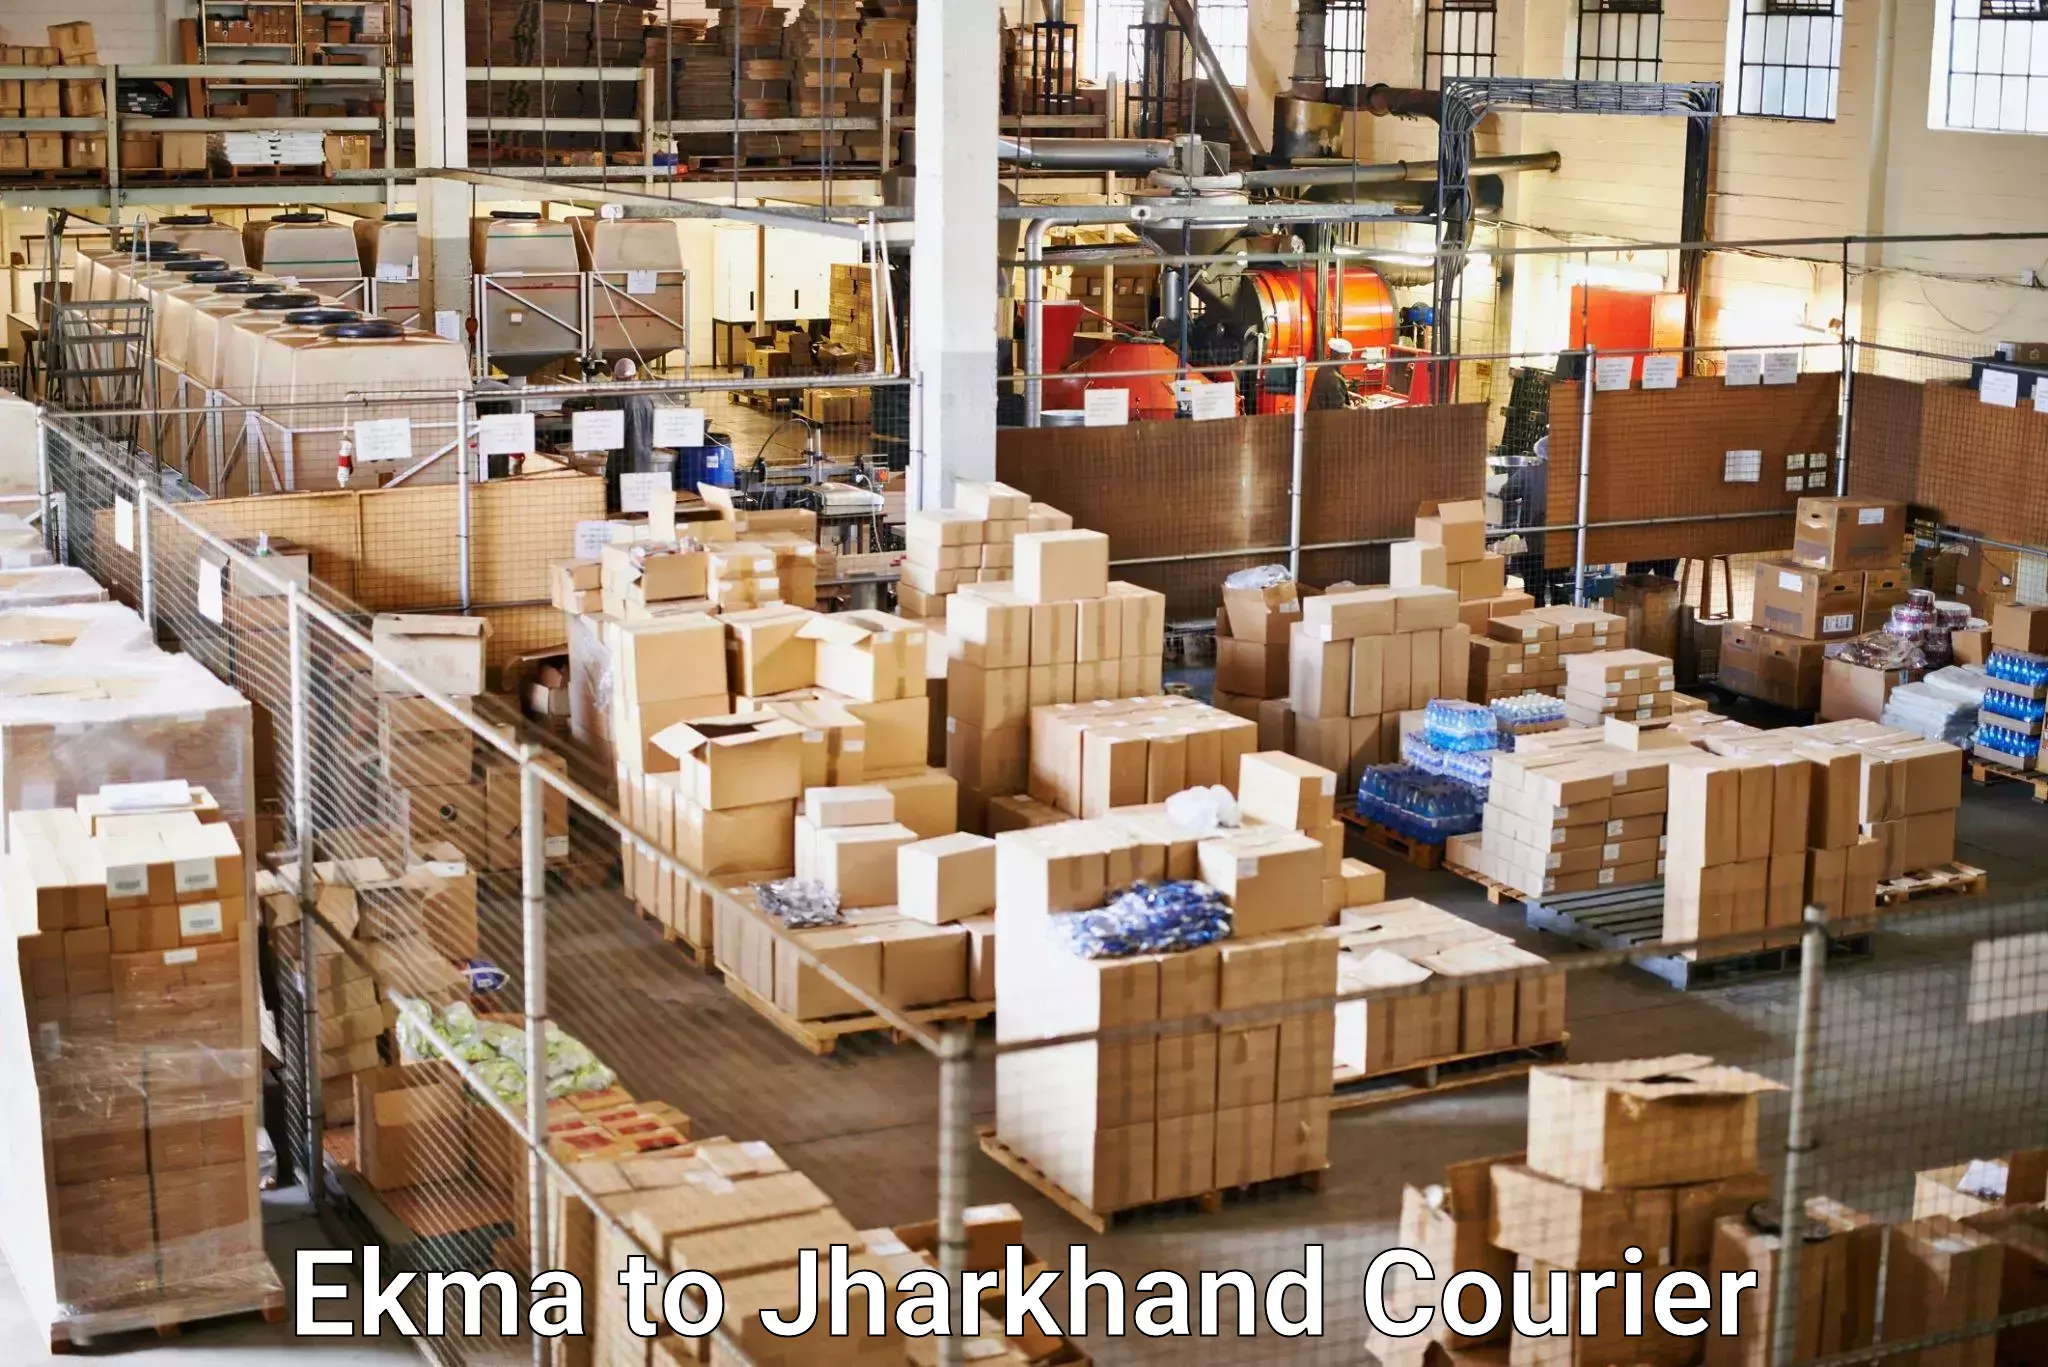 Nationwide shipping capabilities in Ekma to Jharkhand